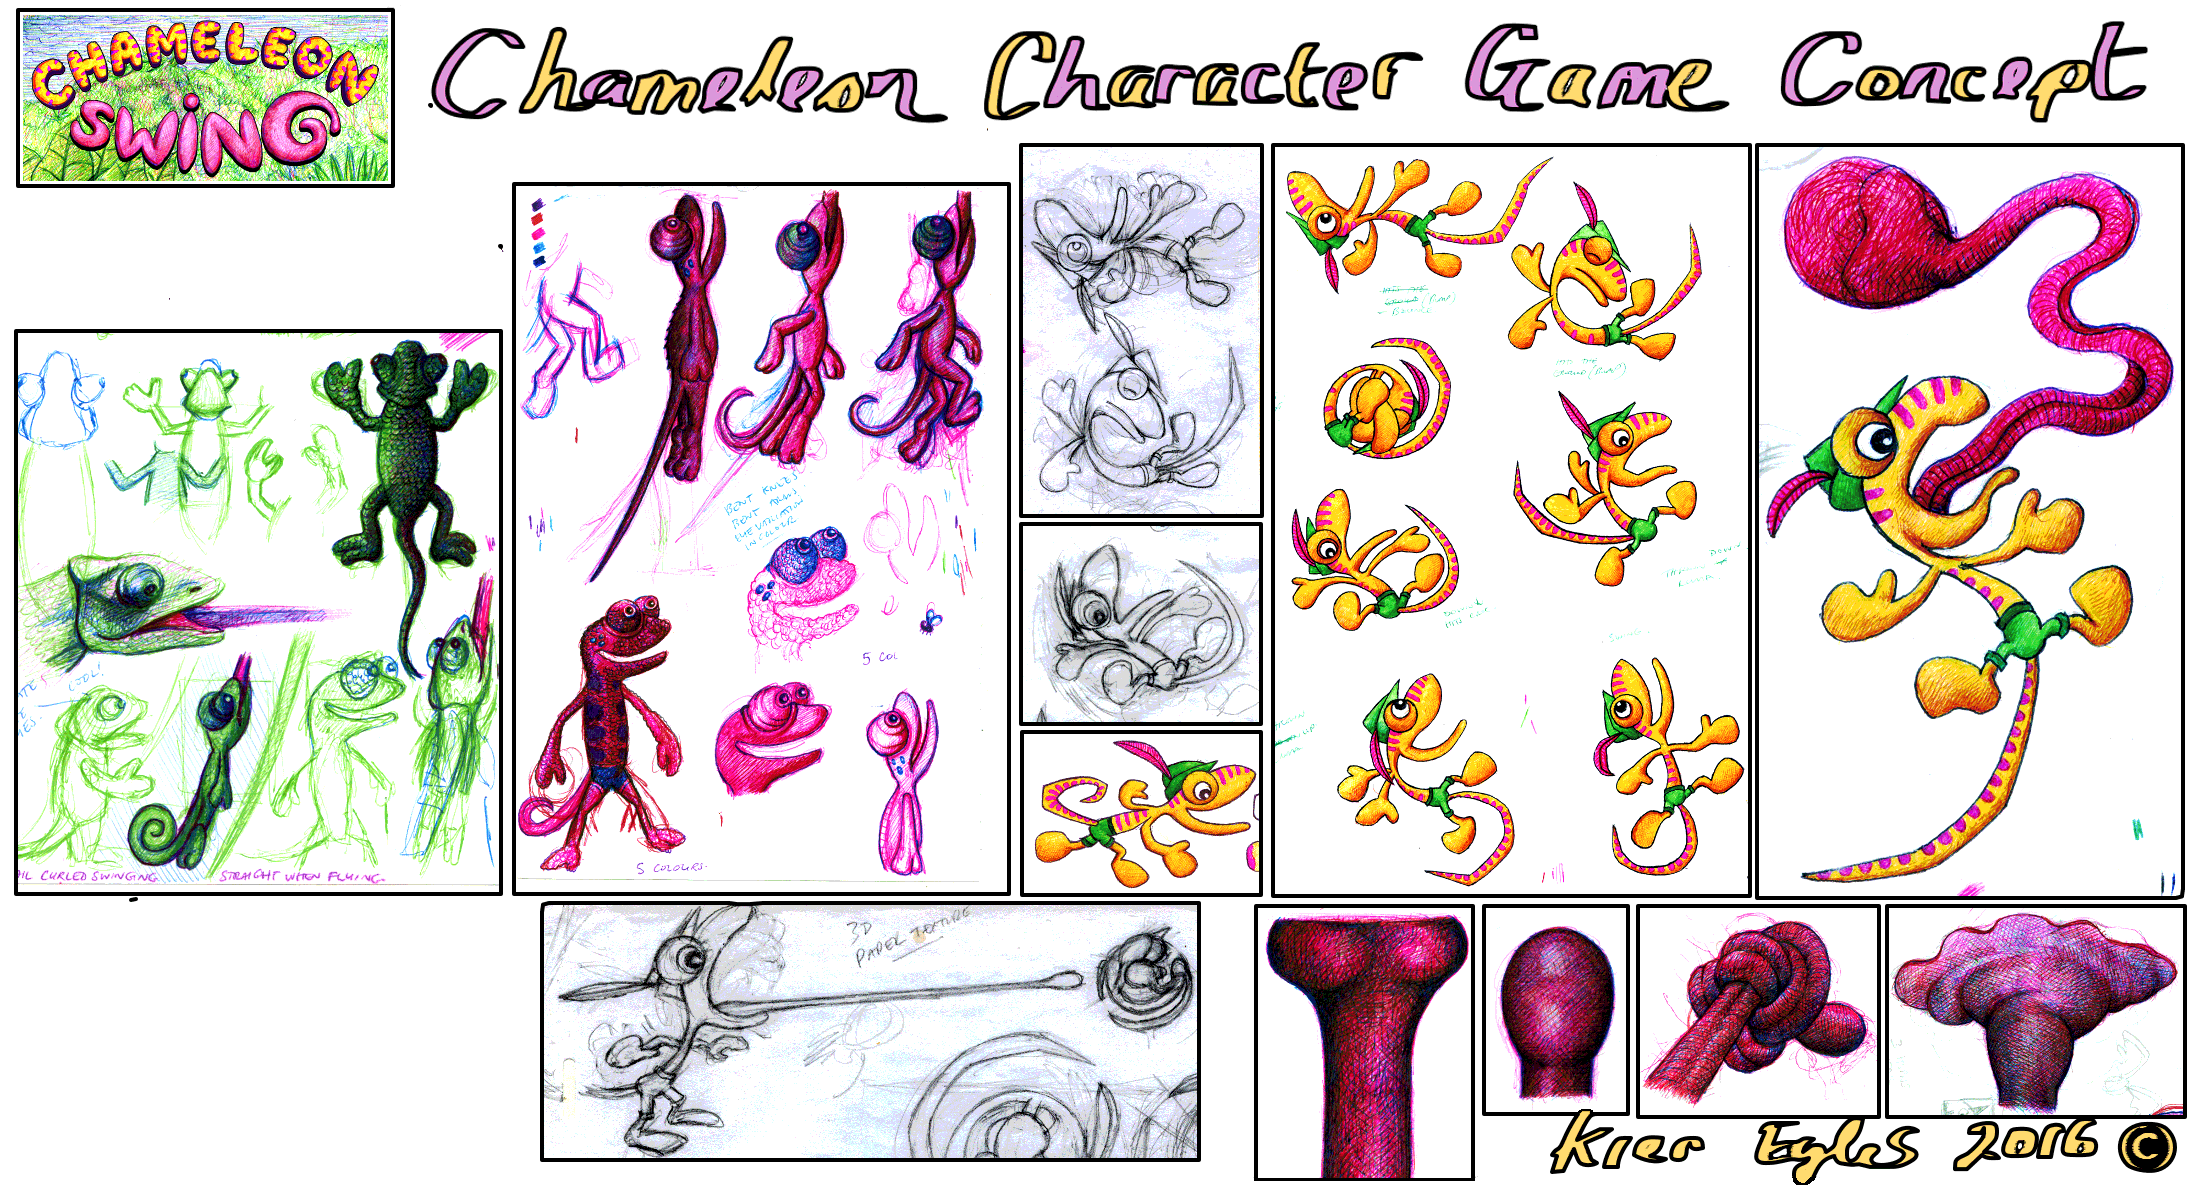 The evolution of the chameleon character from start to finish